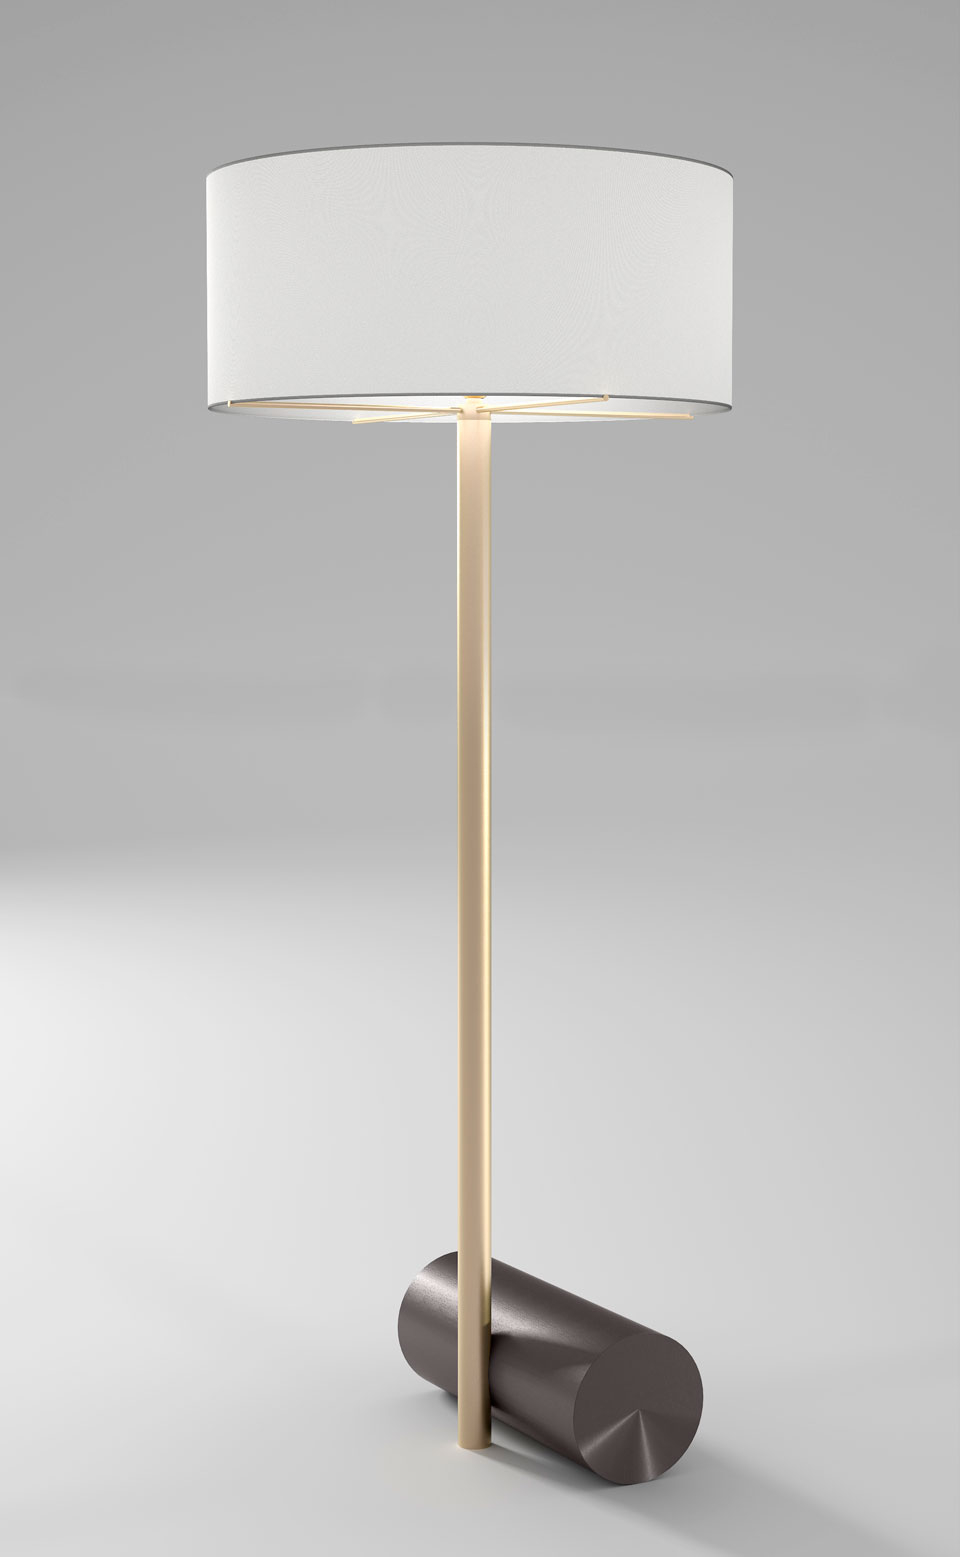 Cale Floor Lamp Graphite Base Satin Brass Foot And Cylindrical Shade In White Percaline Dimmer with regard to measurements 960 X 1557